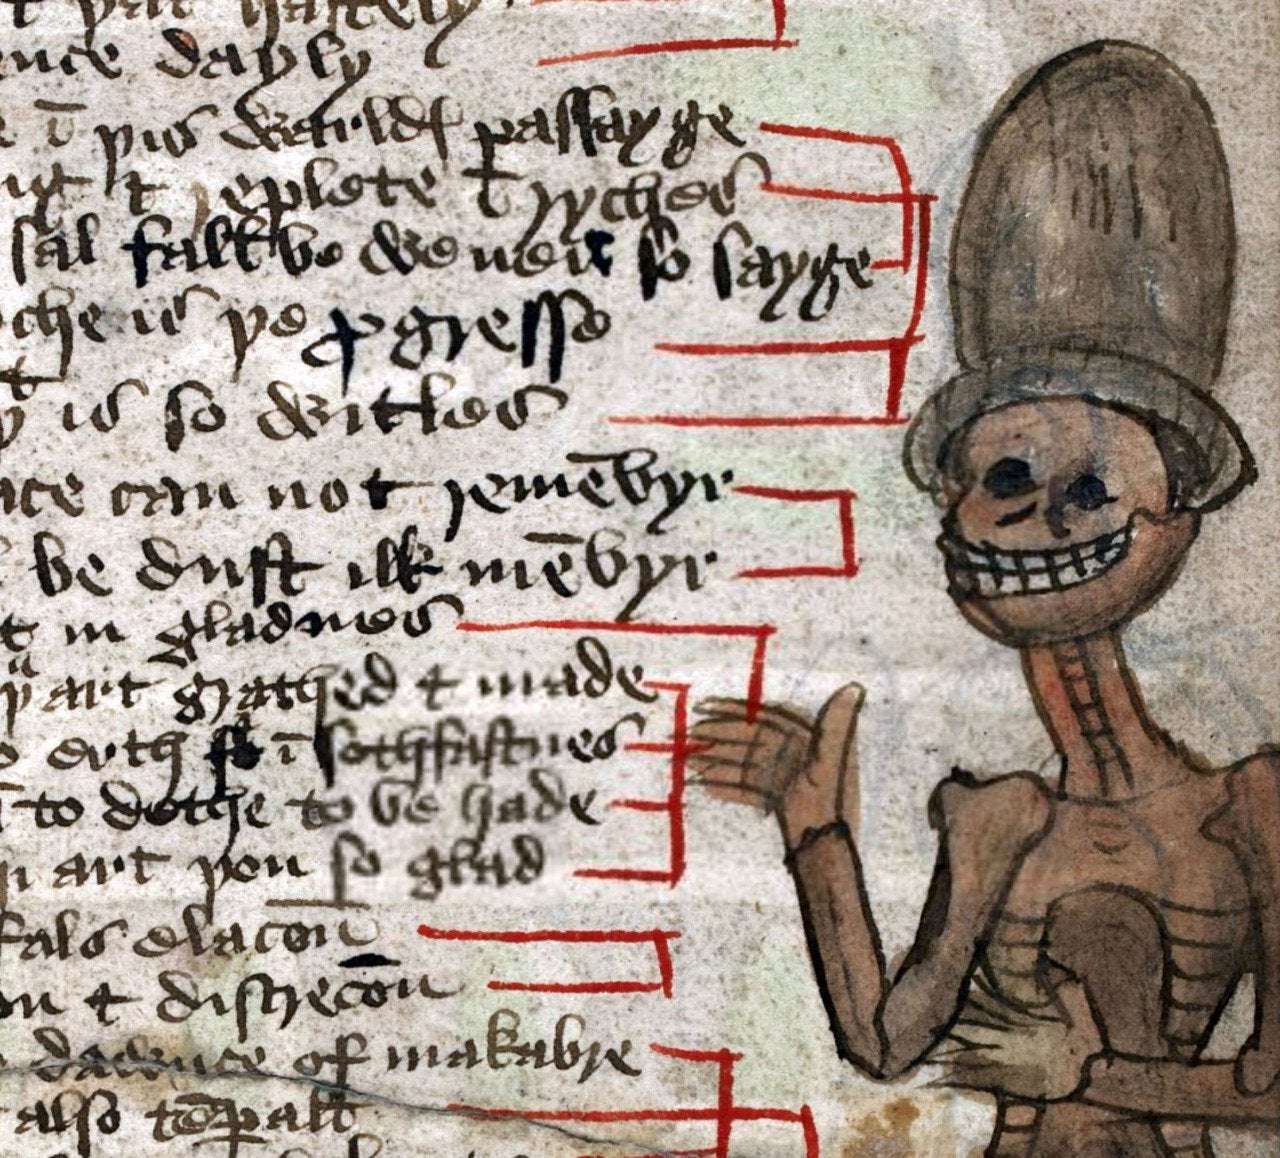 image for The Humorous and Absurd World of Medieval Marginalia